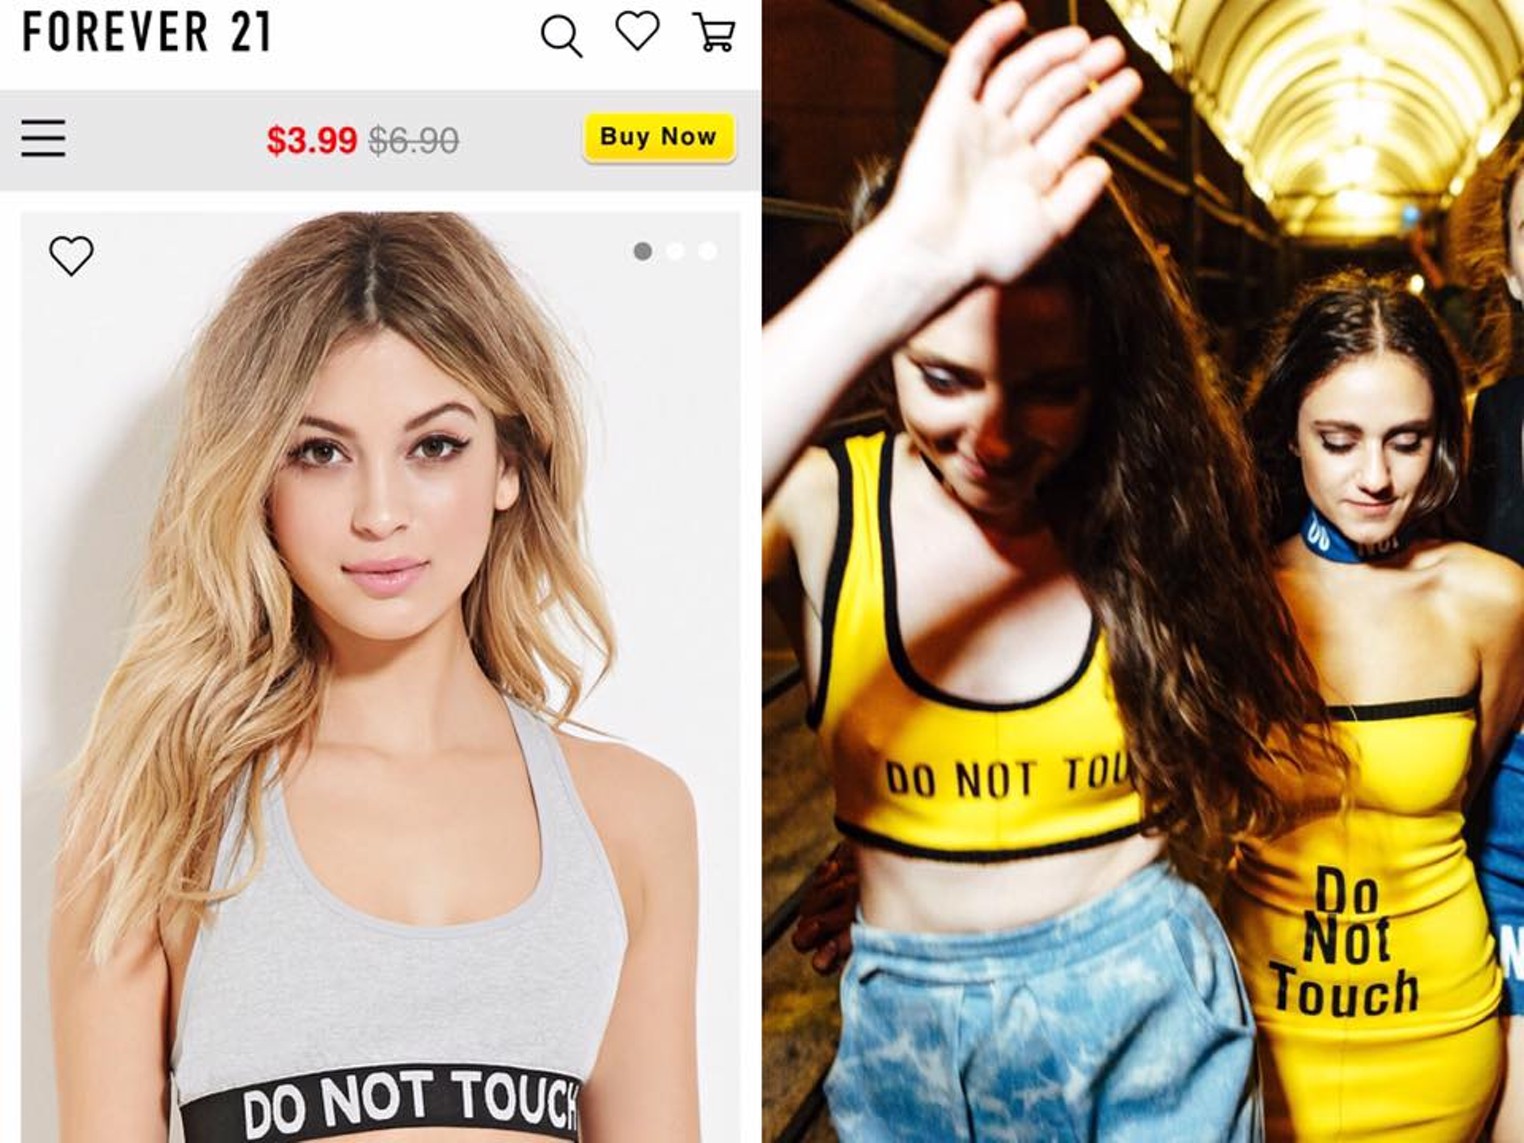 Zara, Forever 21, Fast Fashion Allegedly Full of Copycats